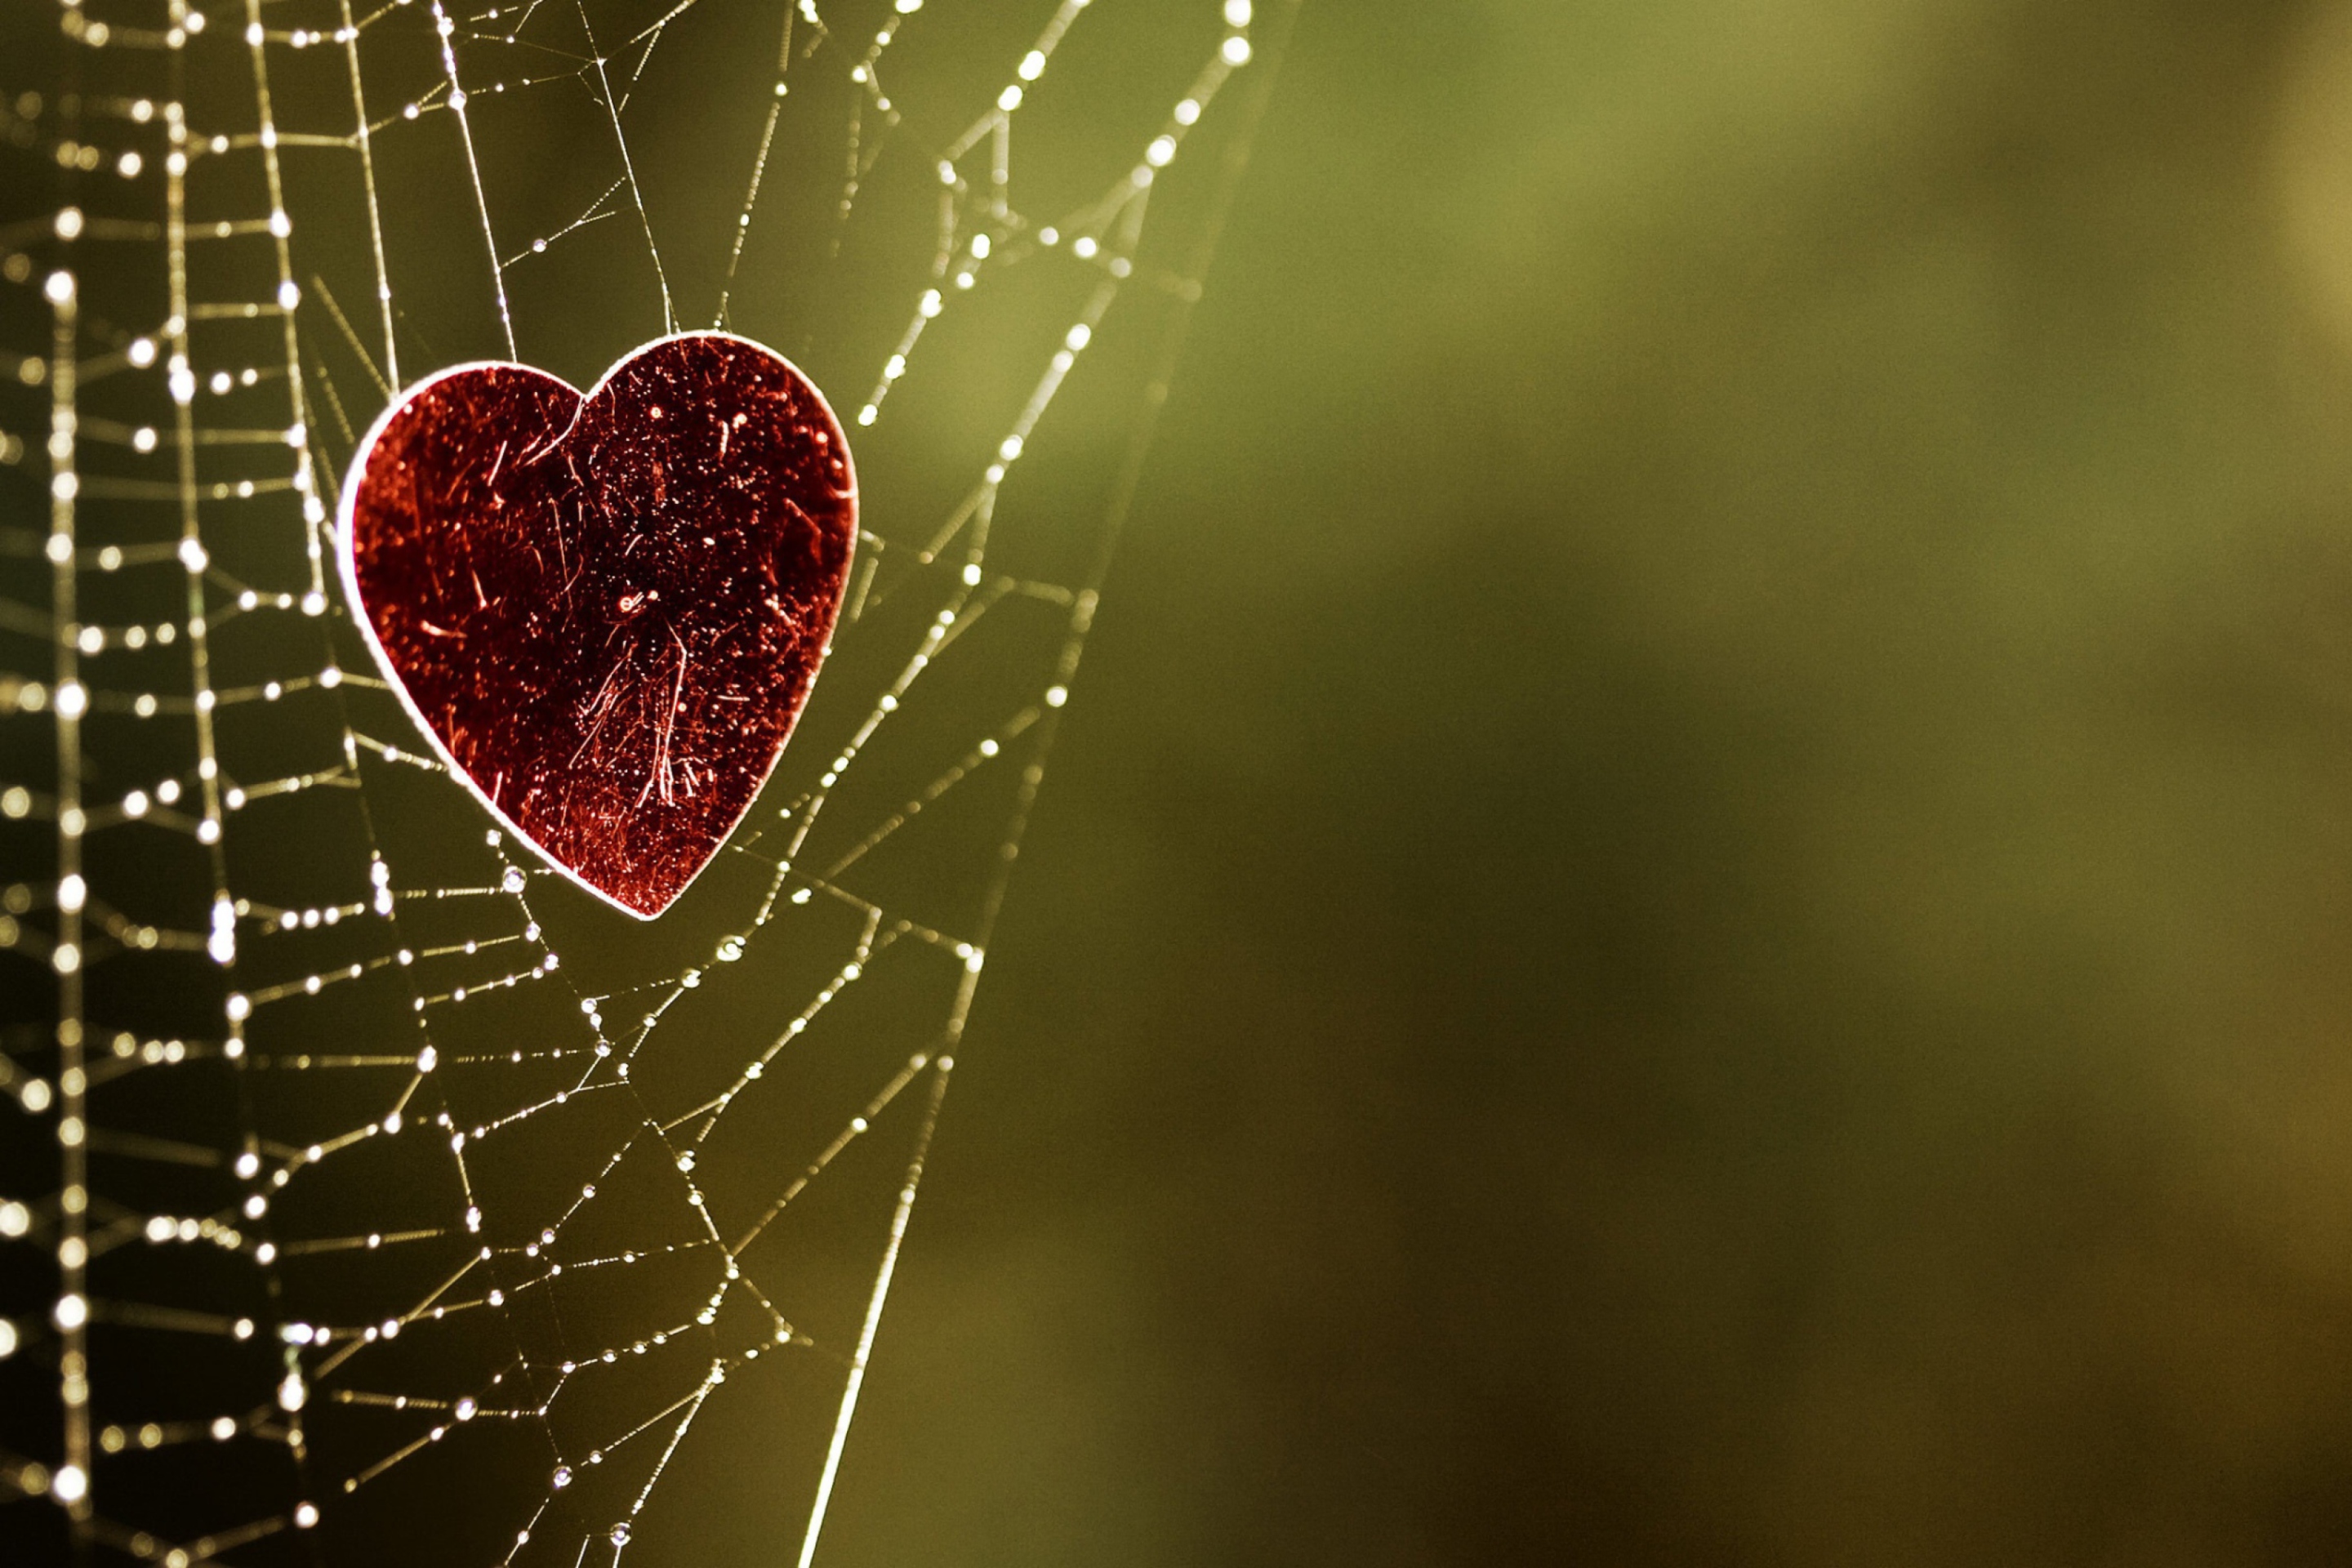 Heart And Spider Web wallpaper 2880x1920